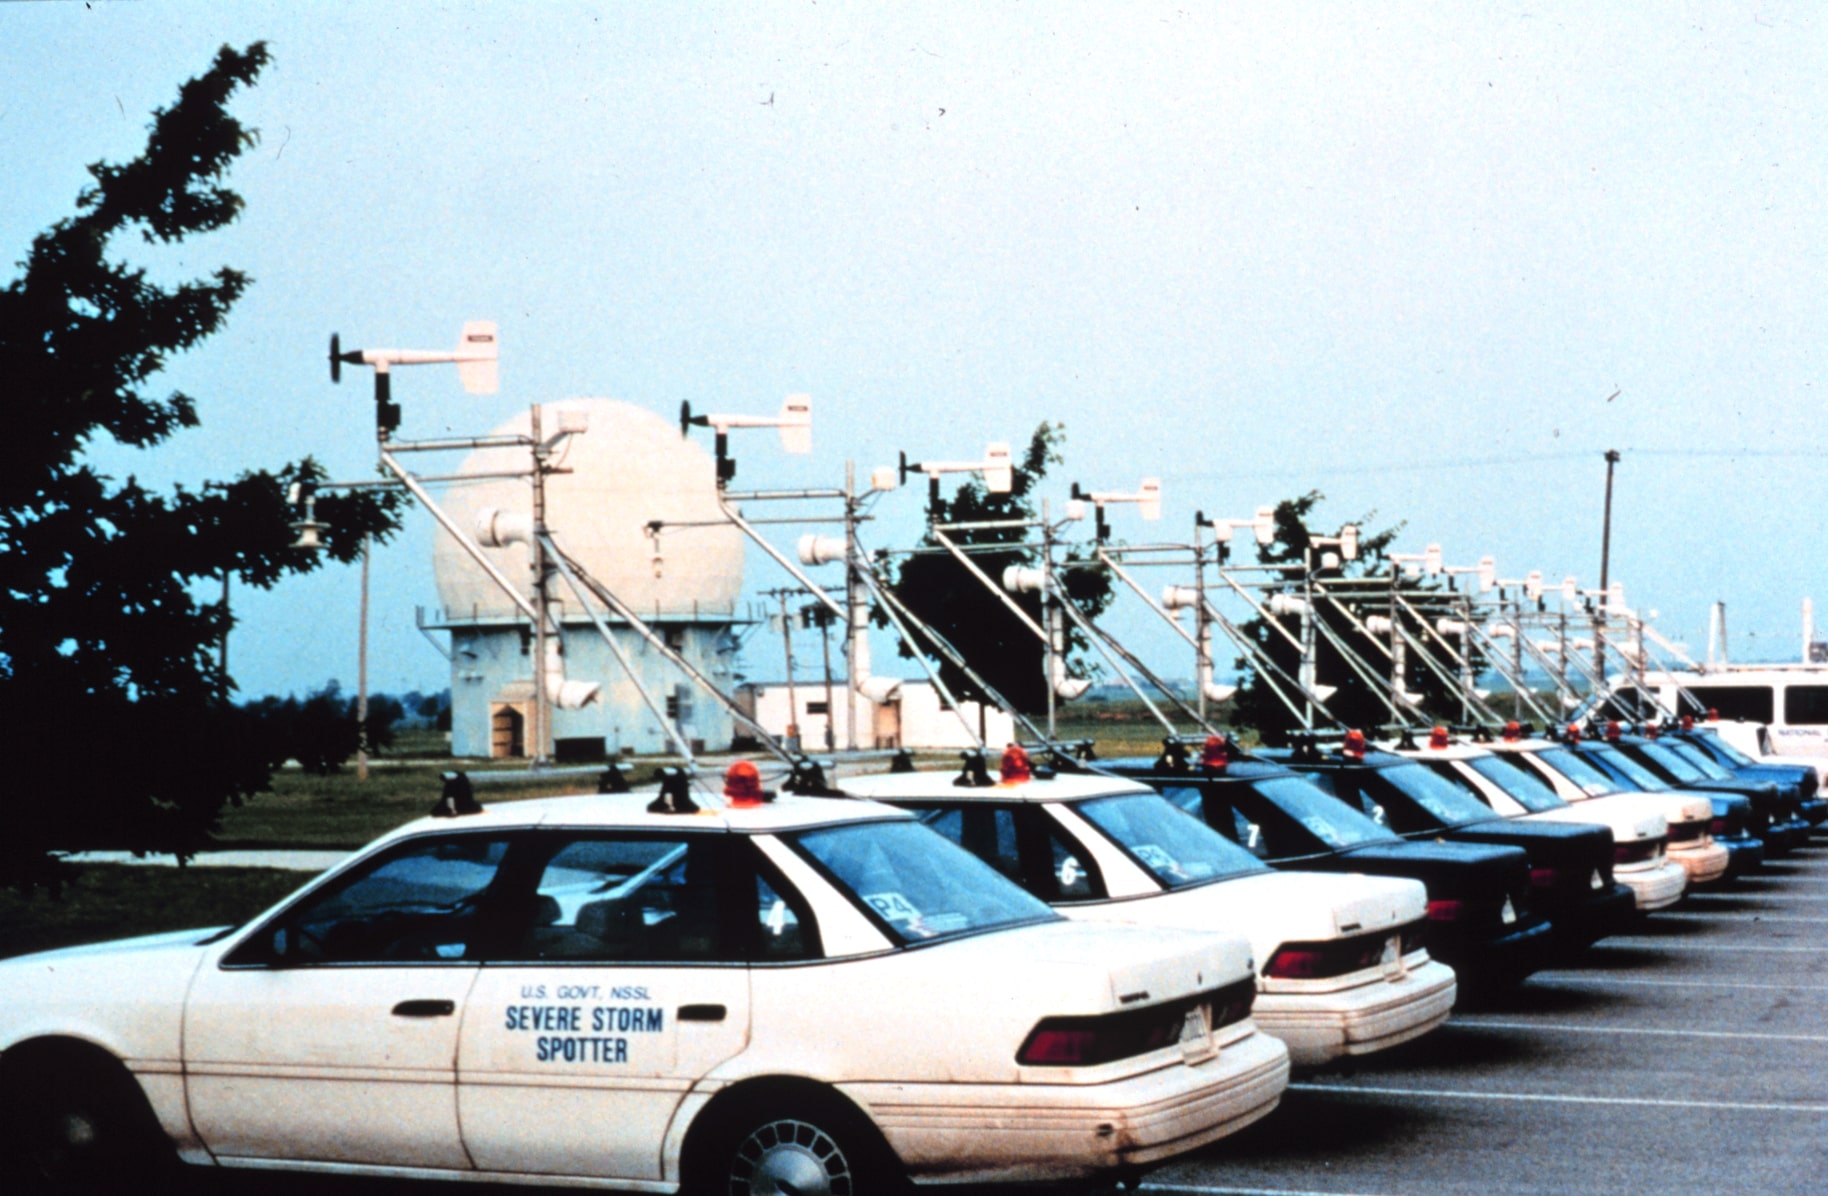 A photo of the original fleet of Mobile Mesonets preparing for the Verification of the Origins of Rotation in Tornadoes EXperiment (VORTEX). Several cars of the same make and model are fixed with weather equipment on top of them and parked in a row, ready for use in the experiment.